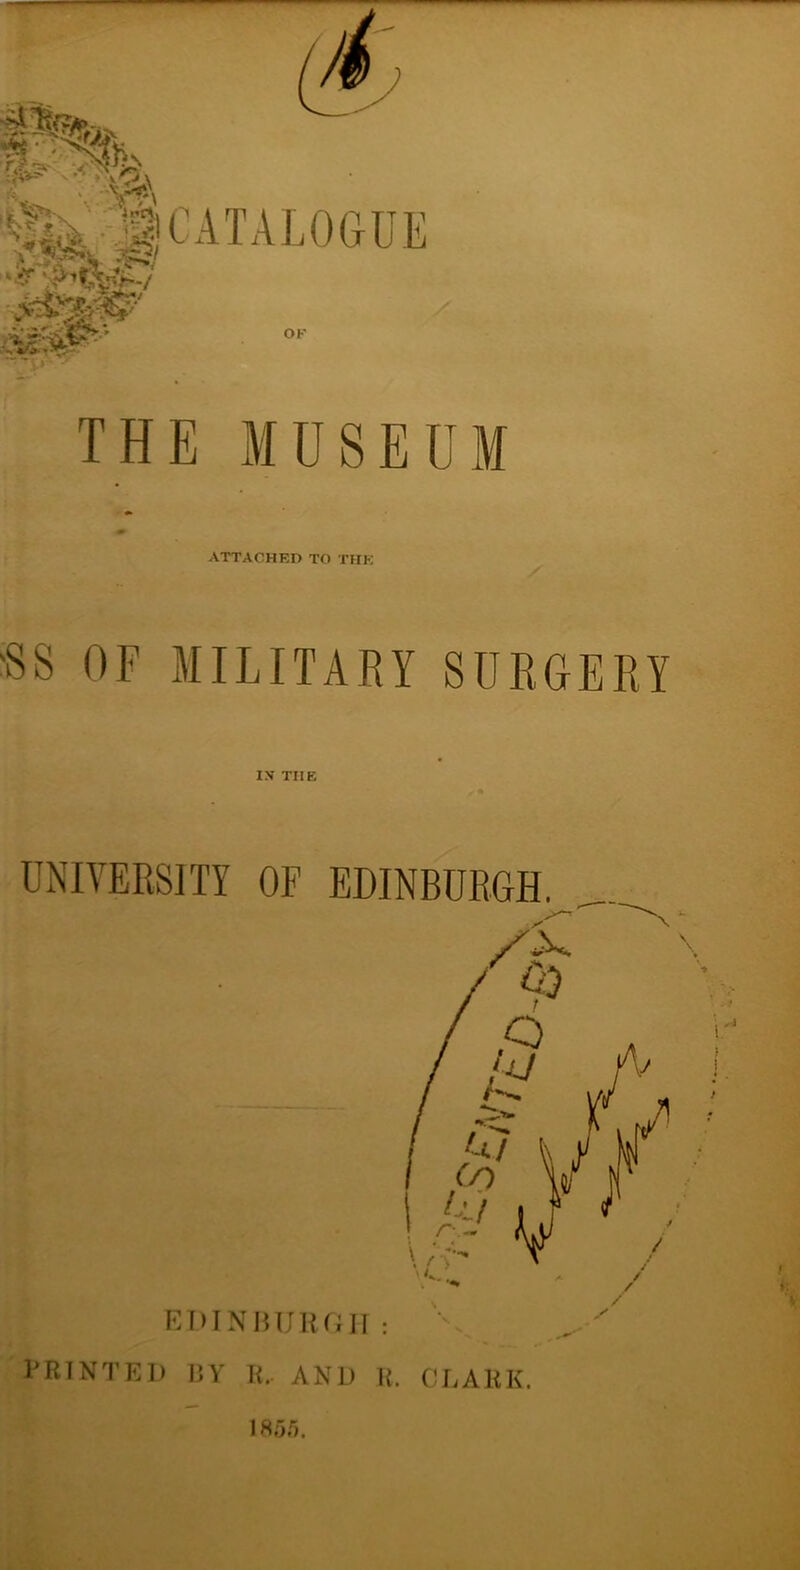 ATTACHED TO THE 'SS OF MILITARY SURGERY IN THE UNIVERSITY OF EDINBURGH. \ PRINTED nv R.. AND R. CLARK. 185.5.